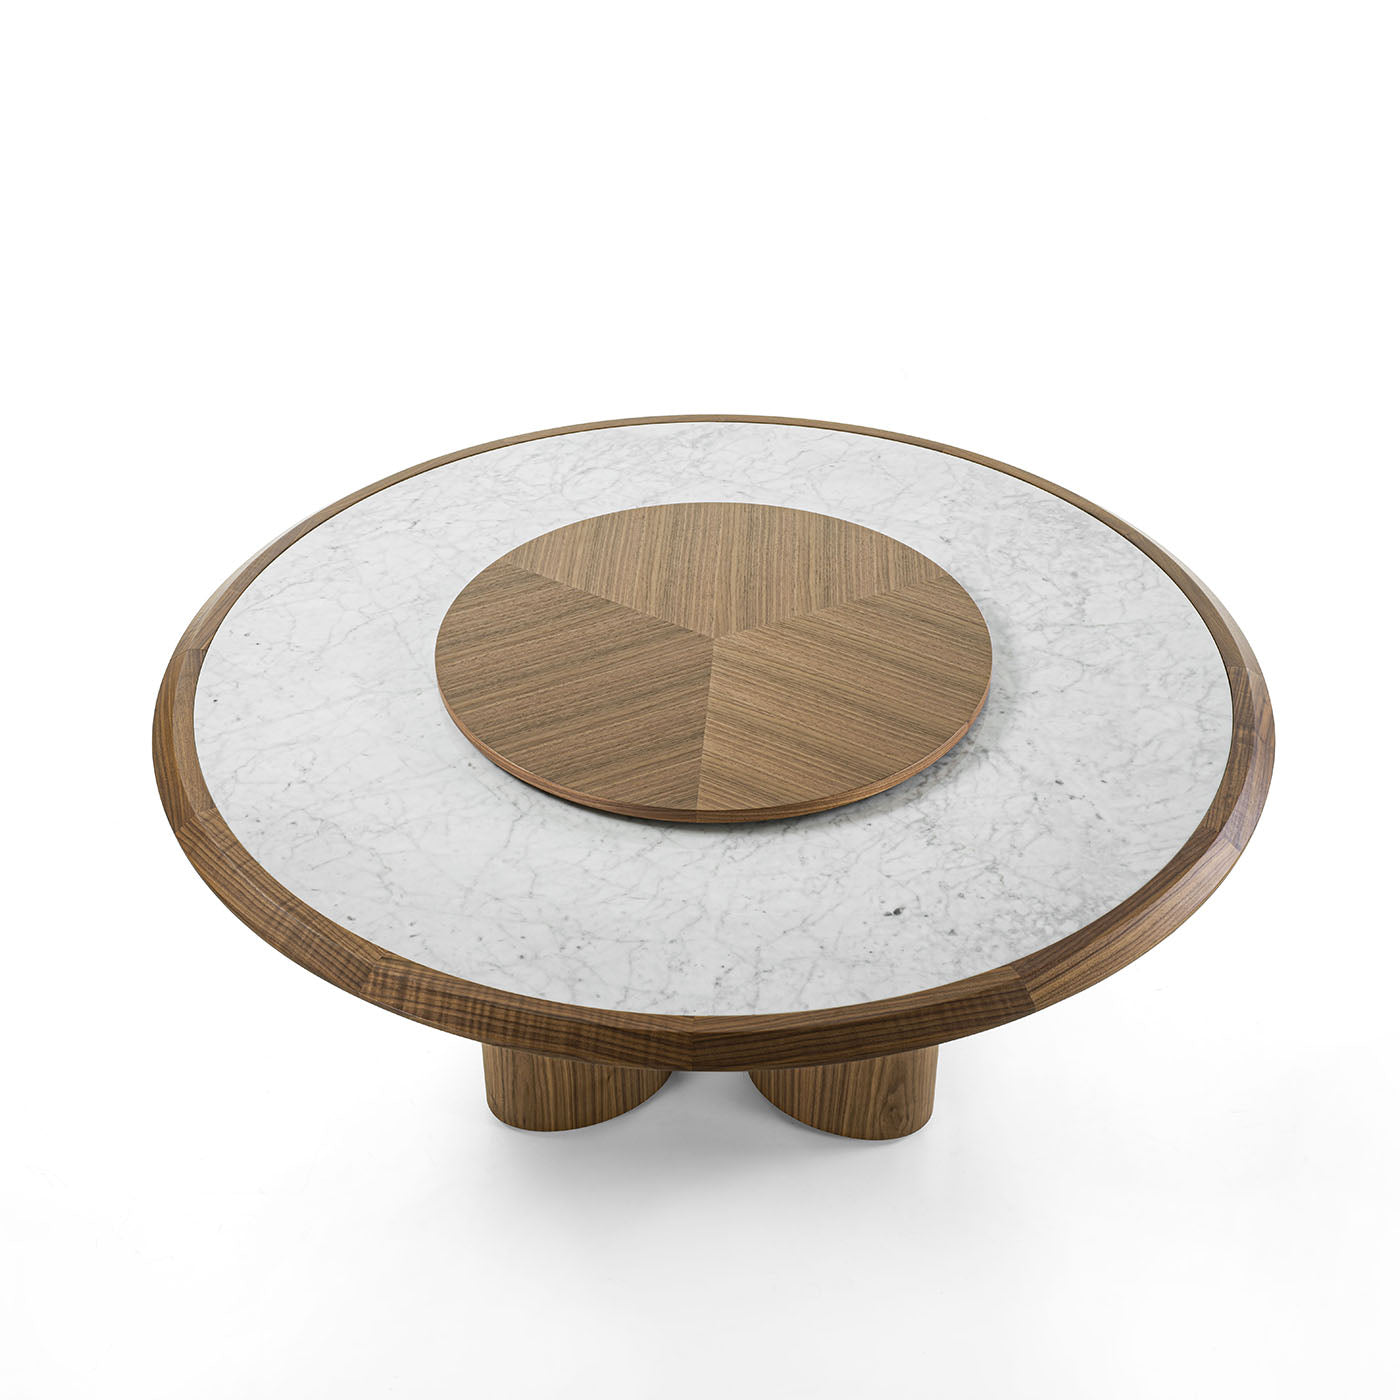 Diamante Table with Carrara Marble Top & Wooden Lazy Susan - Alternative view 1